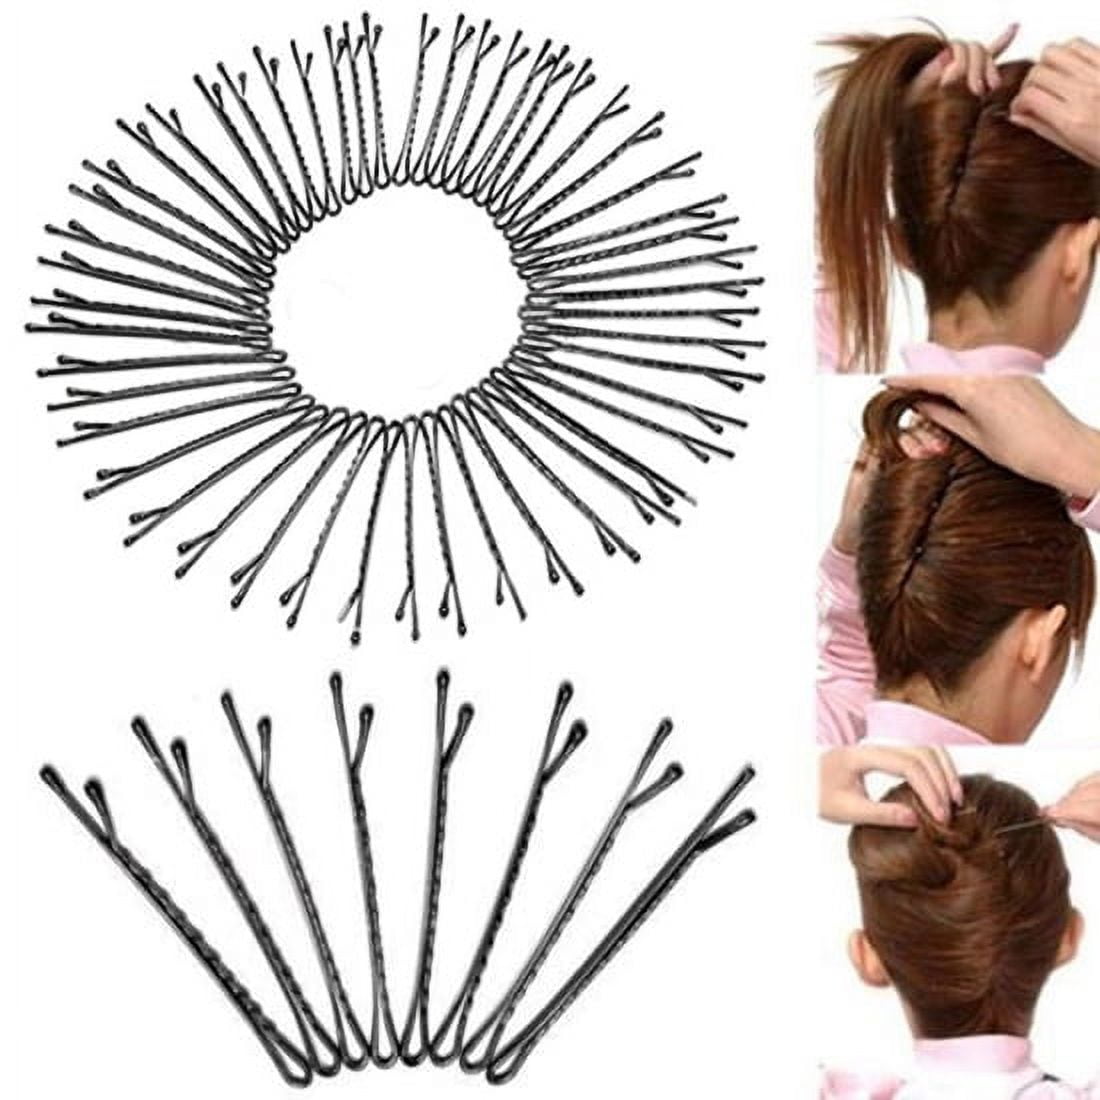 Didiseaon 12pcs Hair Wig Clips for Women Clips with Safety Pins Beret  Fixing Clip Wig Clips to Secure Wig No Sew Wig Making Clip Hair Holder Kits  Wig